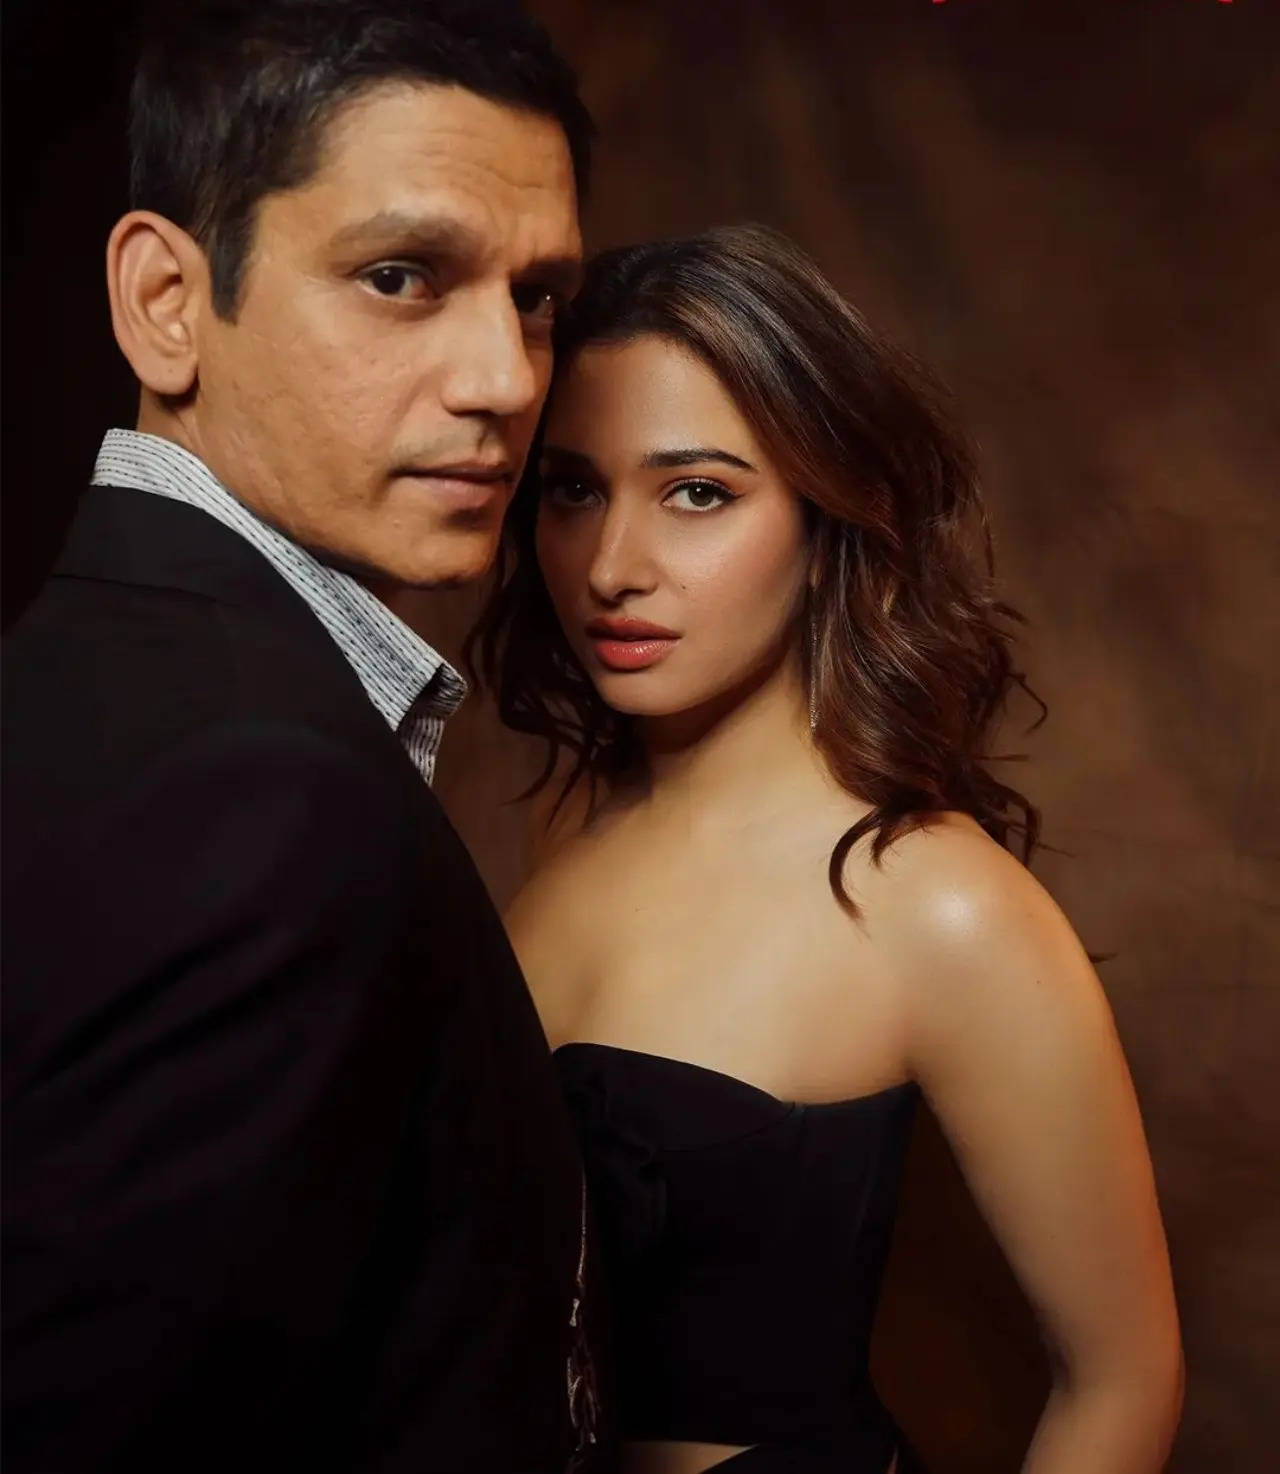 In Lust Tales 2, Tamannaah Bhatia describes what it was like to film intimate sequences with Vijay Varma.